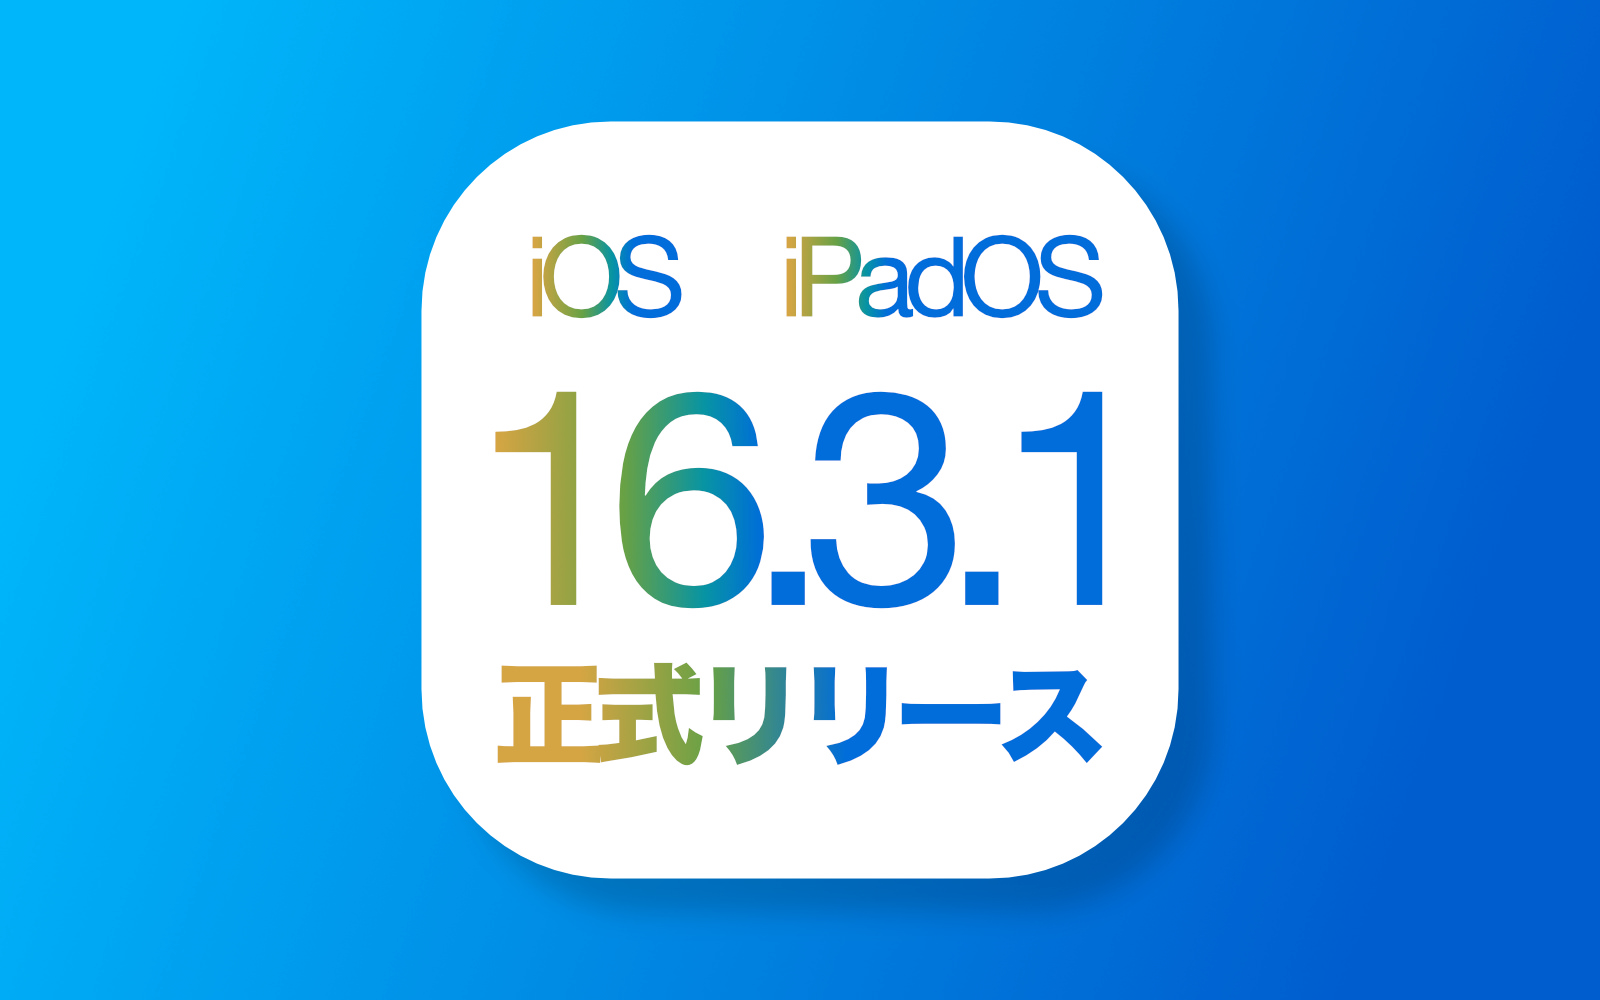 IOS 16 3 1 official release